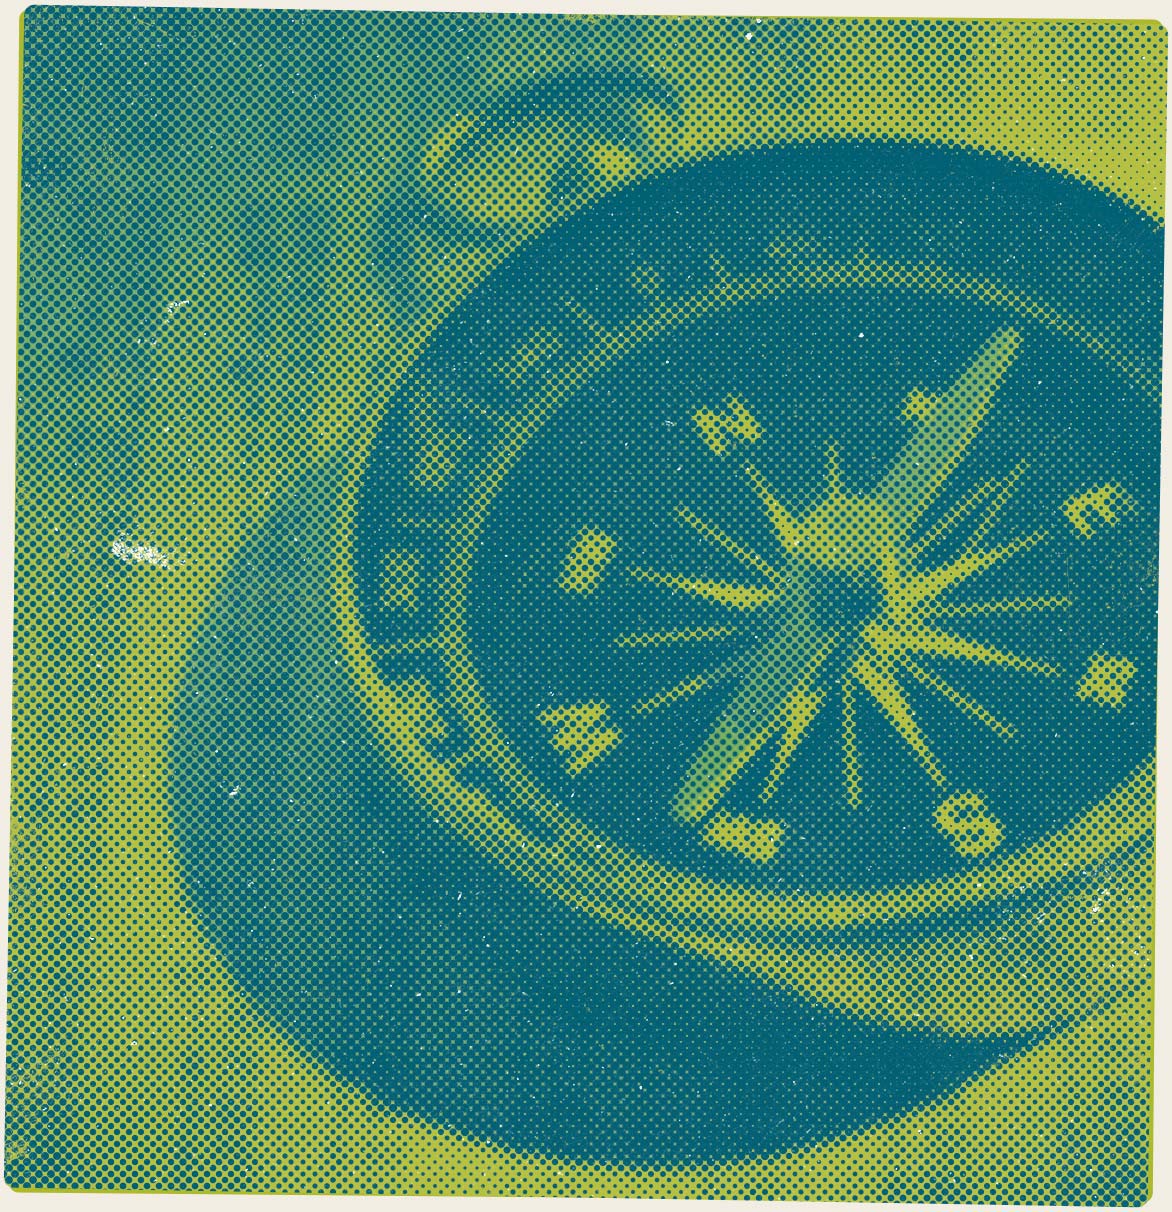 Green and blue halftone compass